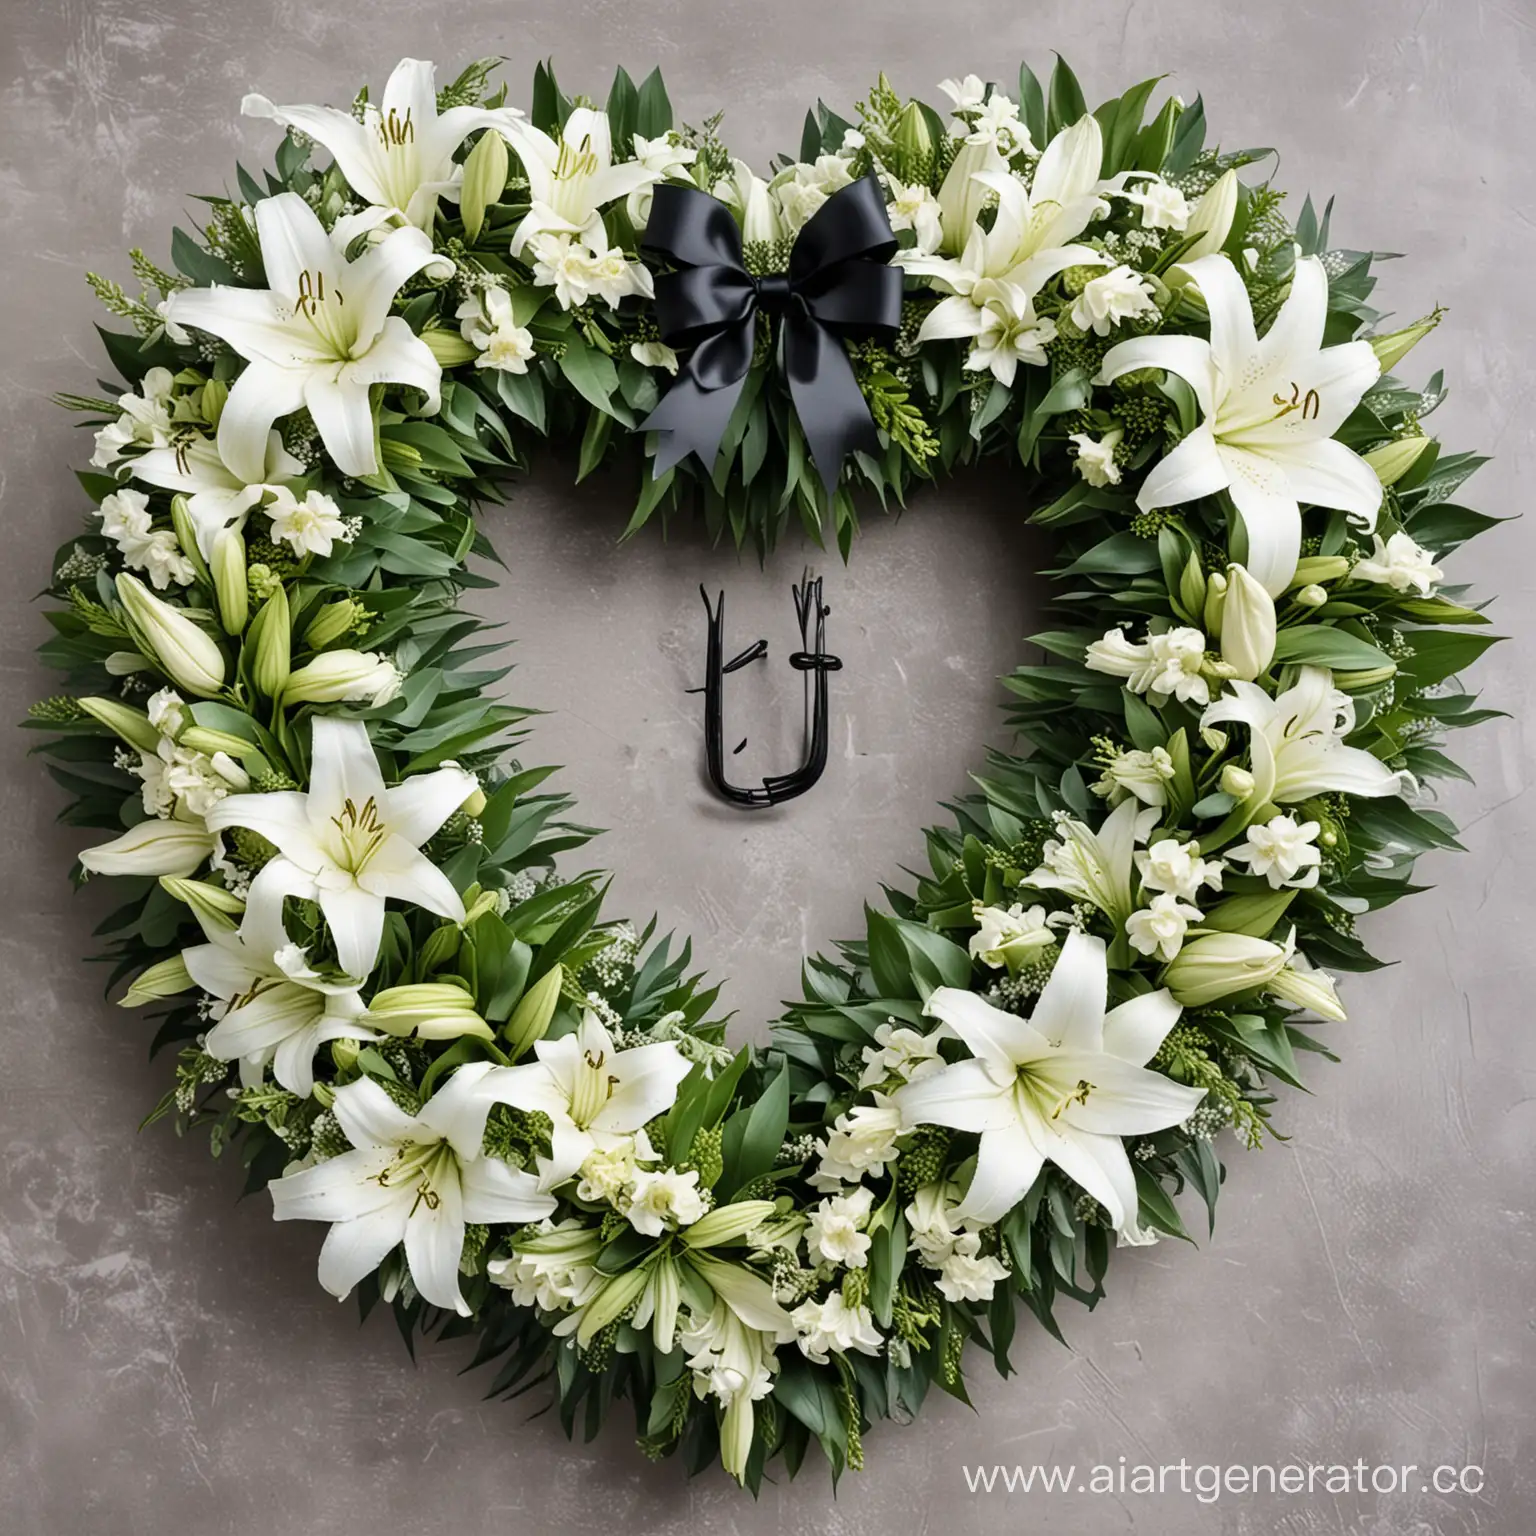 HeartShaped-Funeral-Wreath-with-White-Lilies-and-Green-Leaves